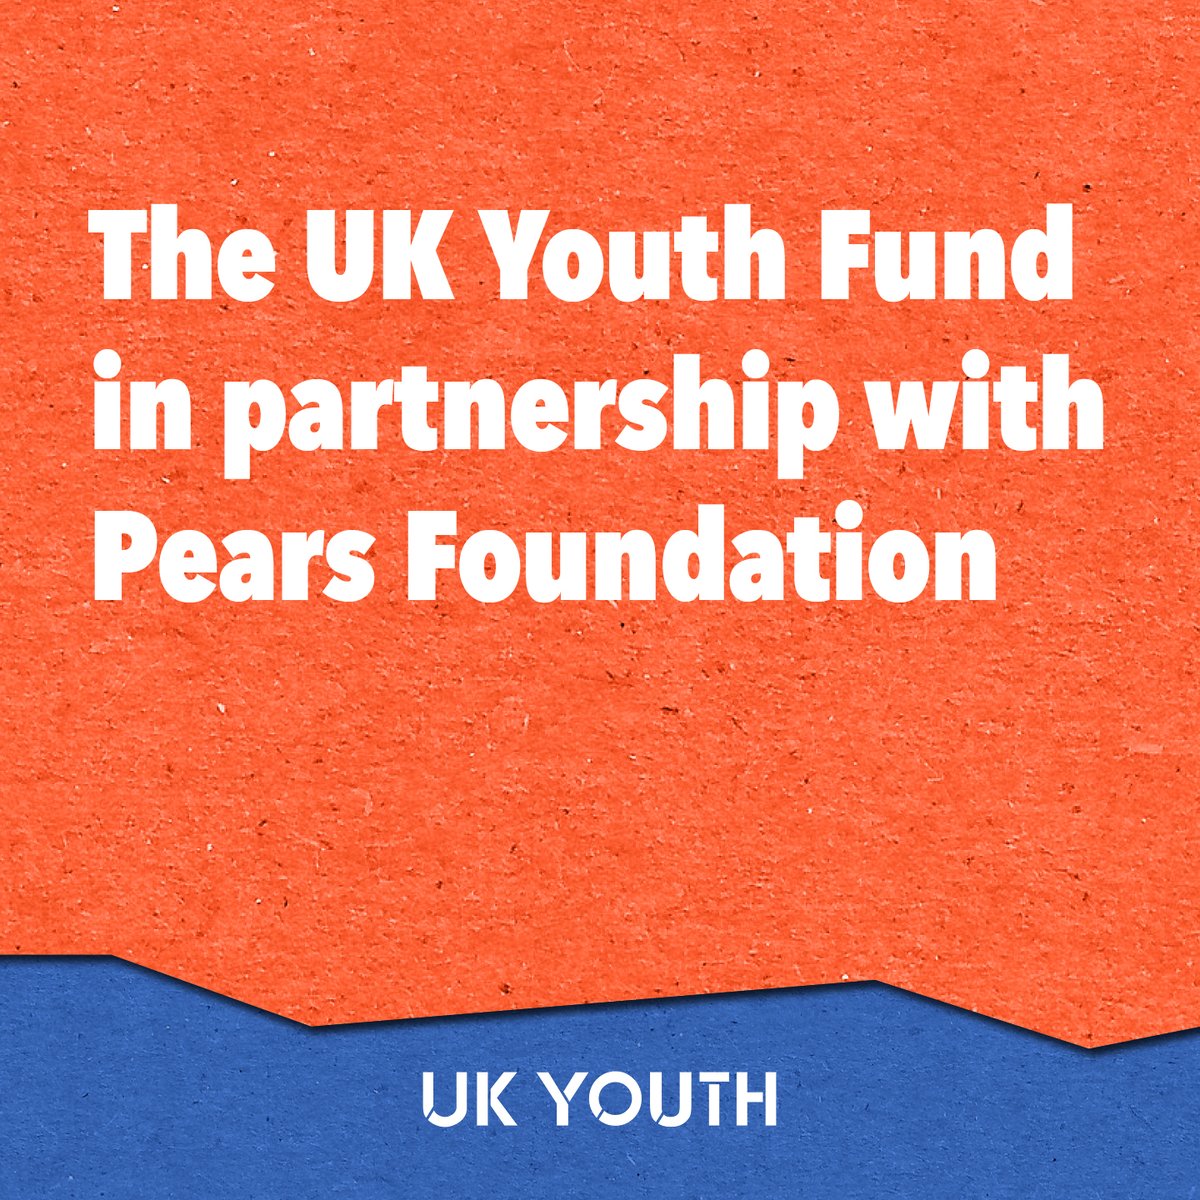 🚨 We are delighted to announce the UK Youth Fund in partnership with @PearsFoundation - our new £5-million fund to support youth organisations across the country with the #CostOfLiving crisis! 💰 Find out more about the fund here ➡️ ukyouth.org/costofliving/